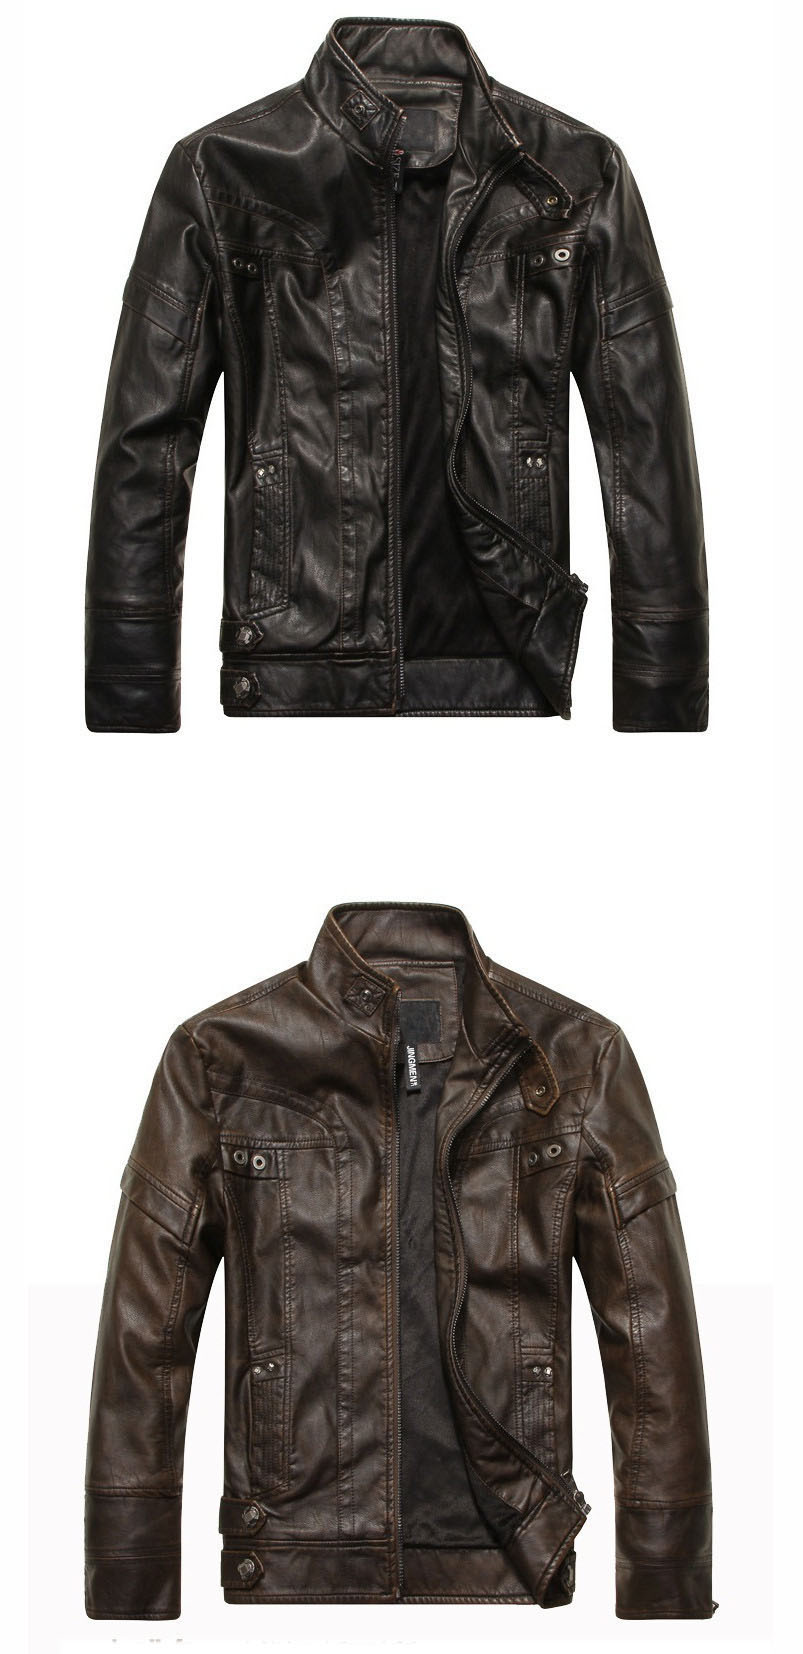 New-arrive-brand-motorcycle-leather-jacket-men-mens-leather-jackets-jaqueta-de-couro-masculina-mens--32277693756